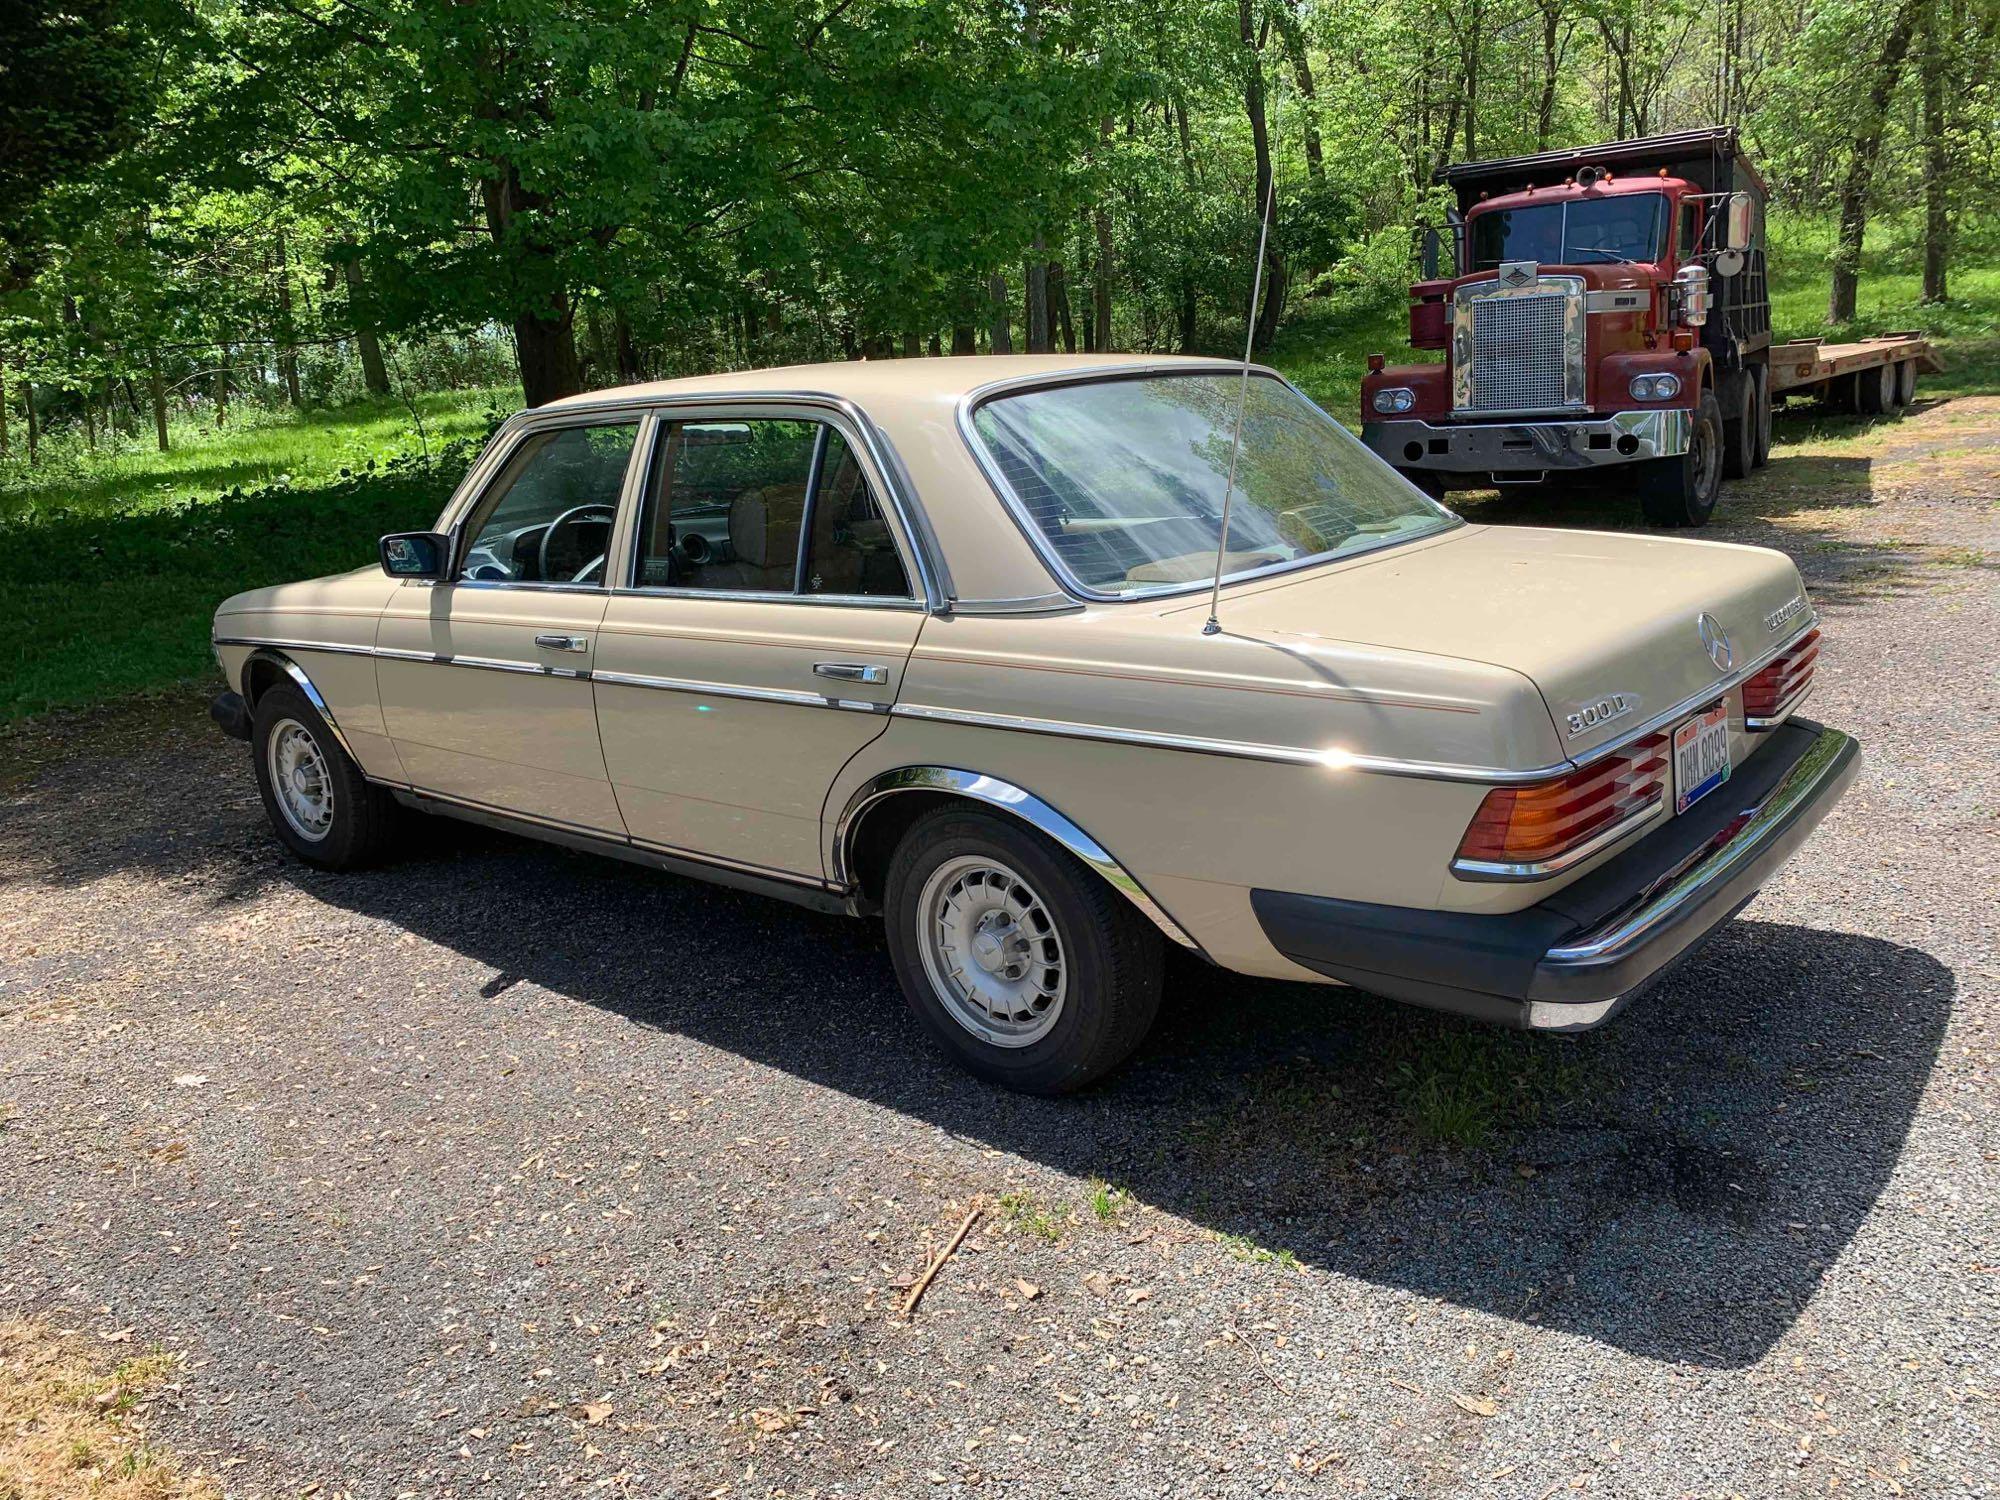 1983 Mercedes Benz , alloy wheels, sunroof, power windows, never driven in snow - clean inside & out